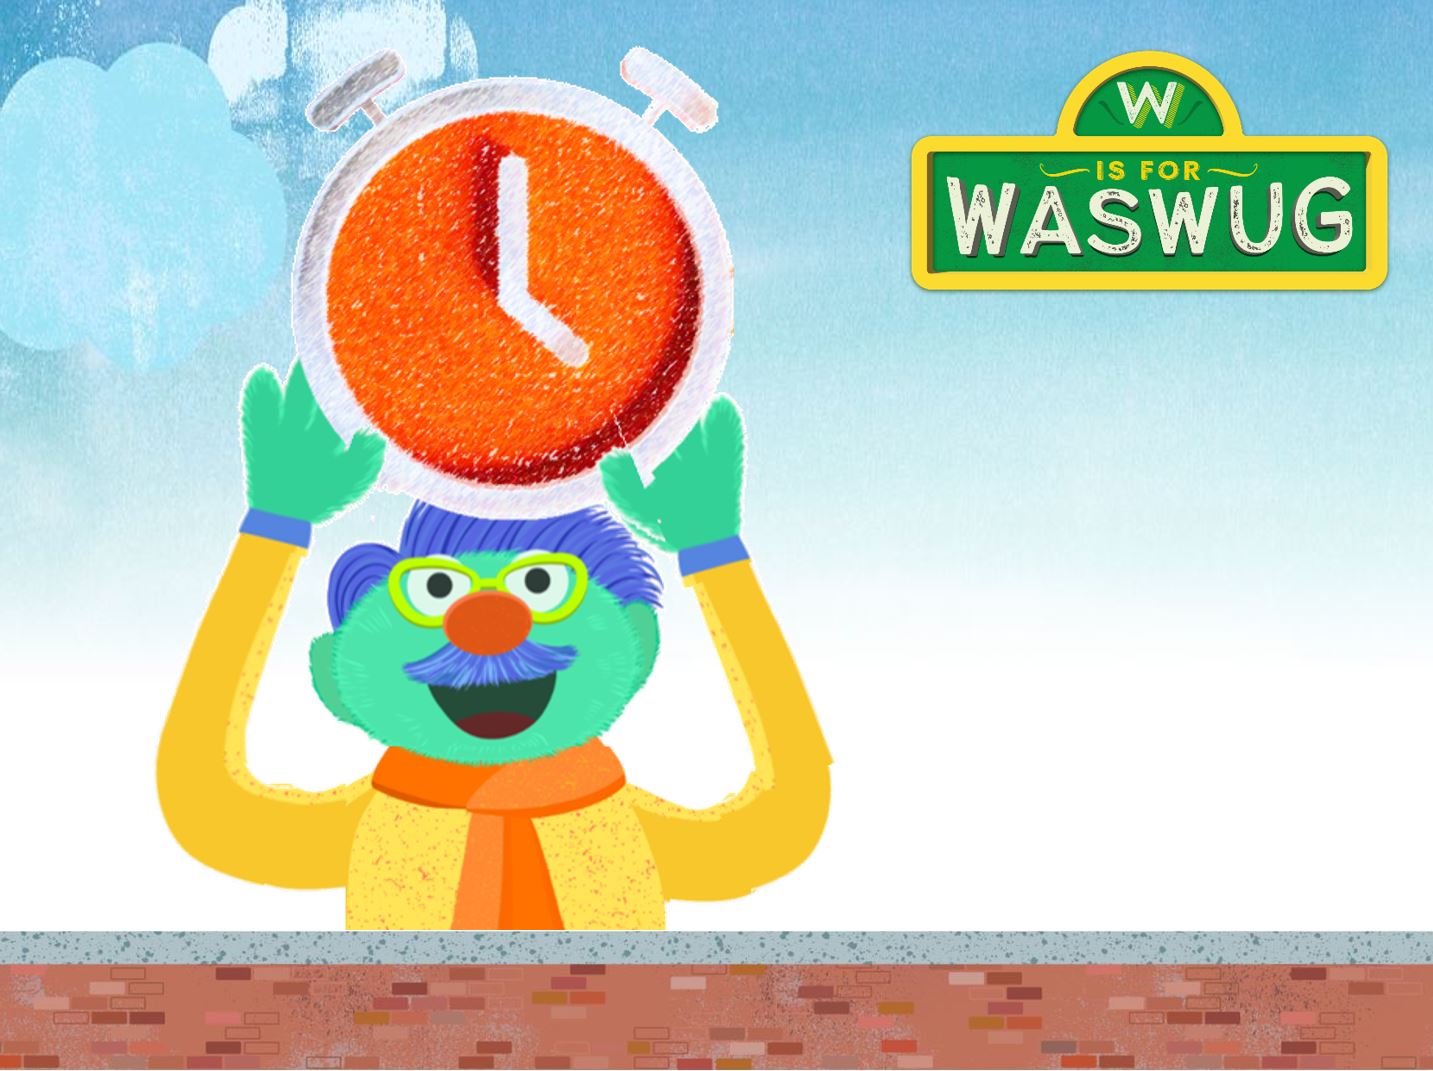 Almost time for WASWUG!